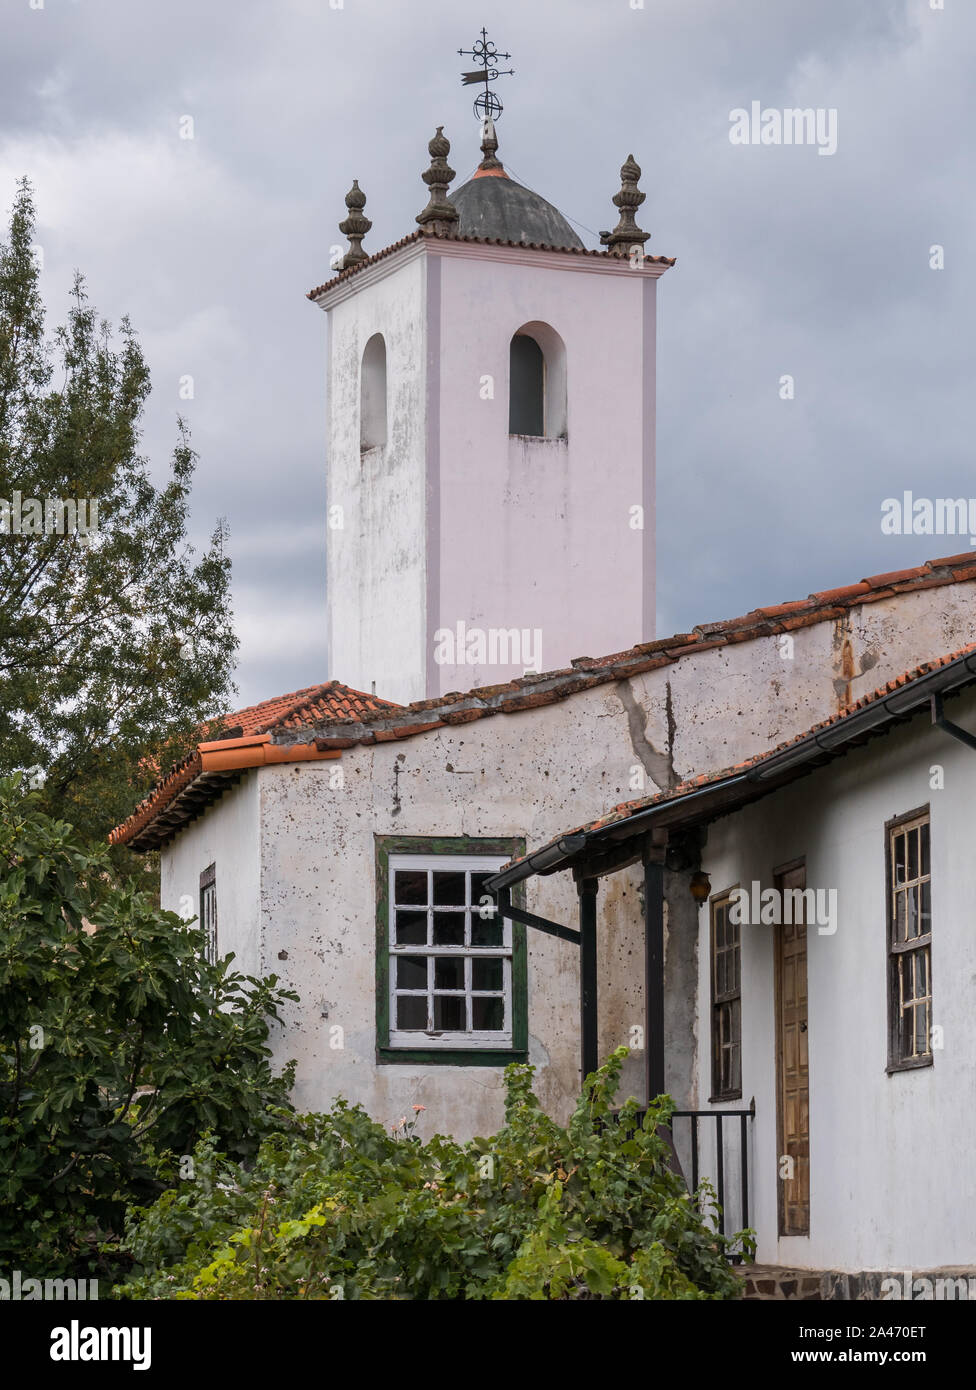 Saint Mary church in the old town, next to the castle, Bragança, Portugal Stock Photo